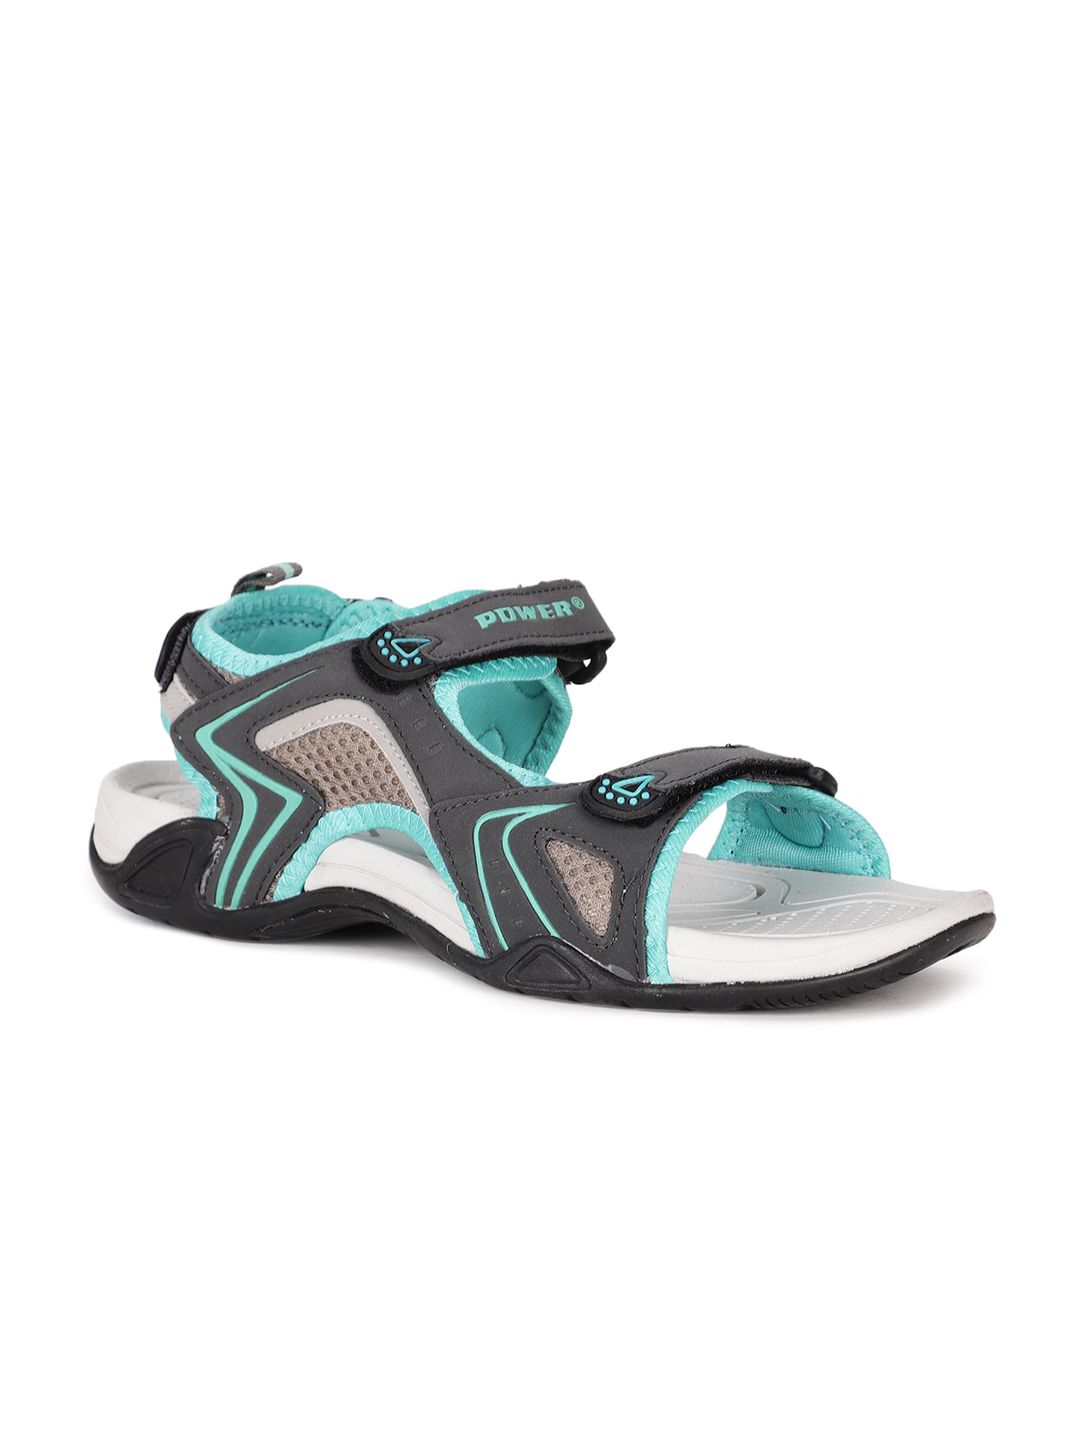 Power Women Blue and Grey Solid Sports Sandals Price in India